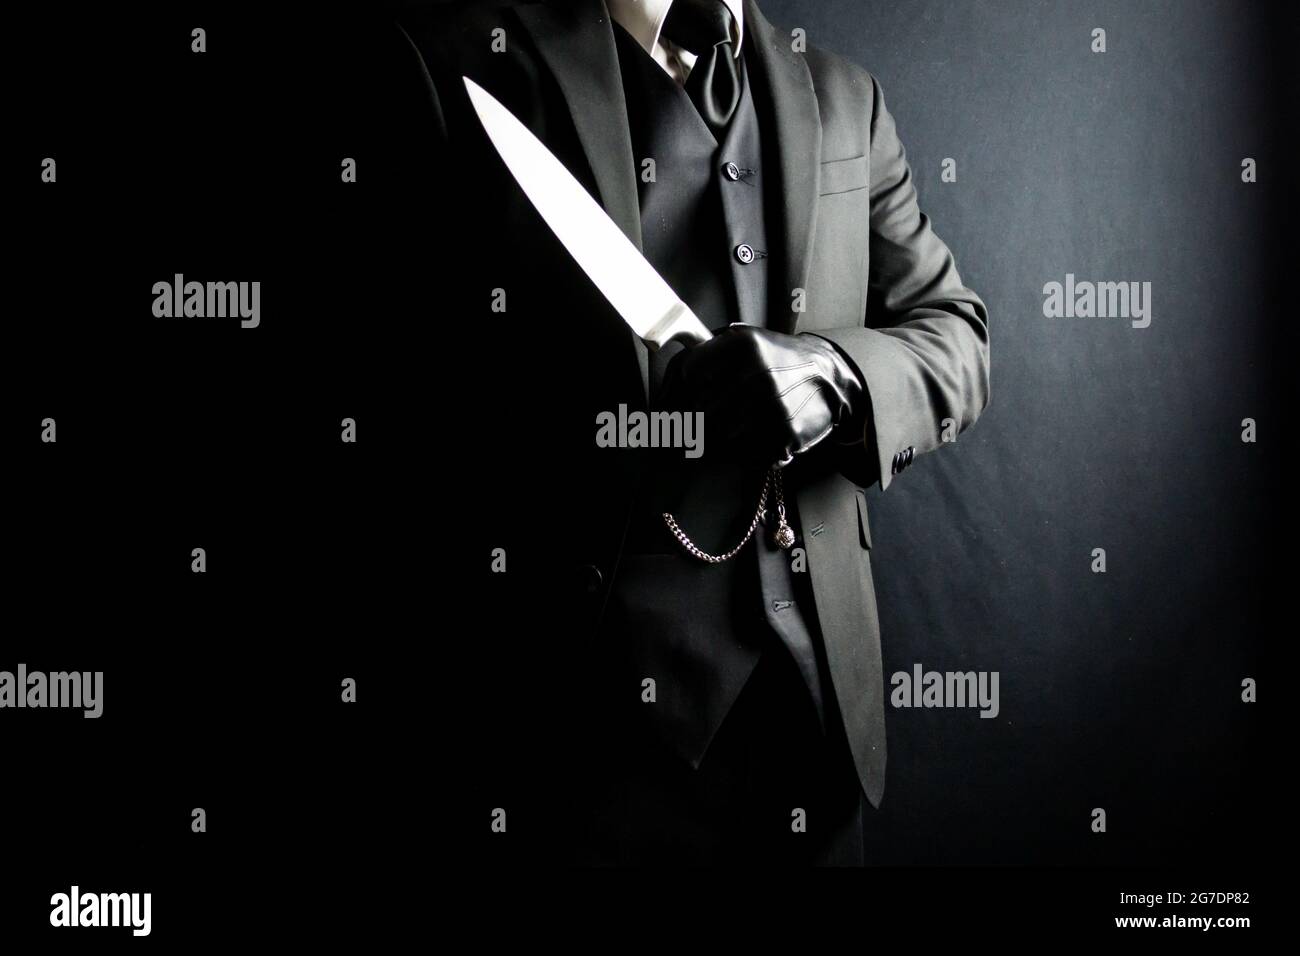 Portrait of Man in Dark Suit and Leather Gloves Holding Sharp Knife on Black Background. Stylish Gentleman Who Will Cut You. Mafia Hitman. Stock Photo